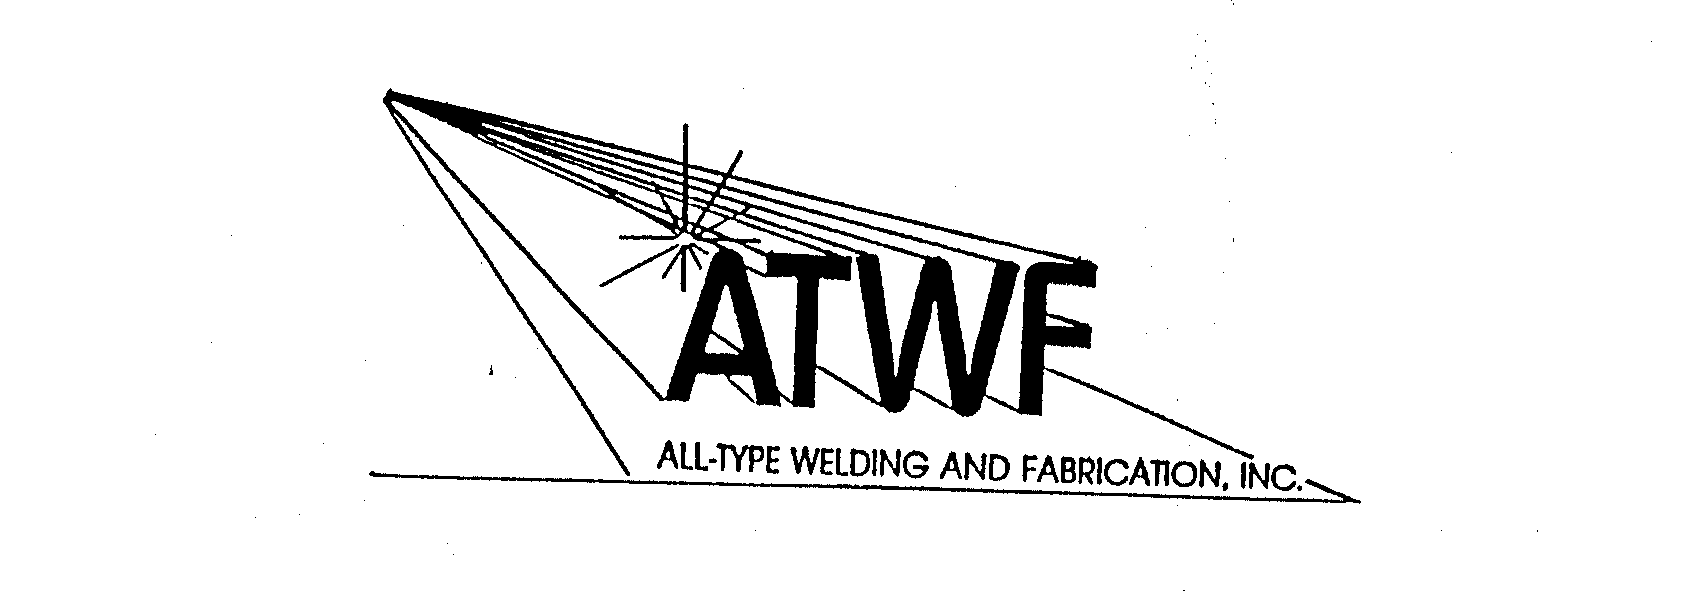  ATWF ALL-TYPE WELDING AND FABRICATION, INC.